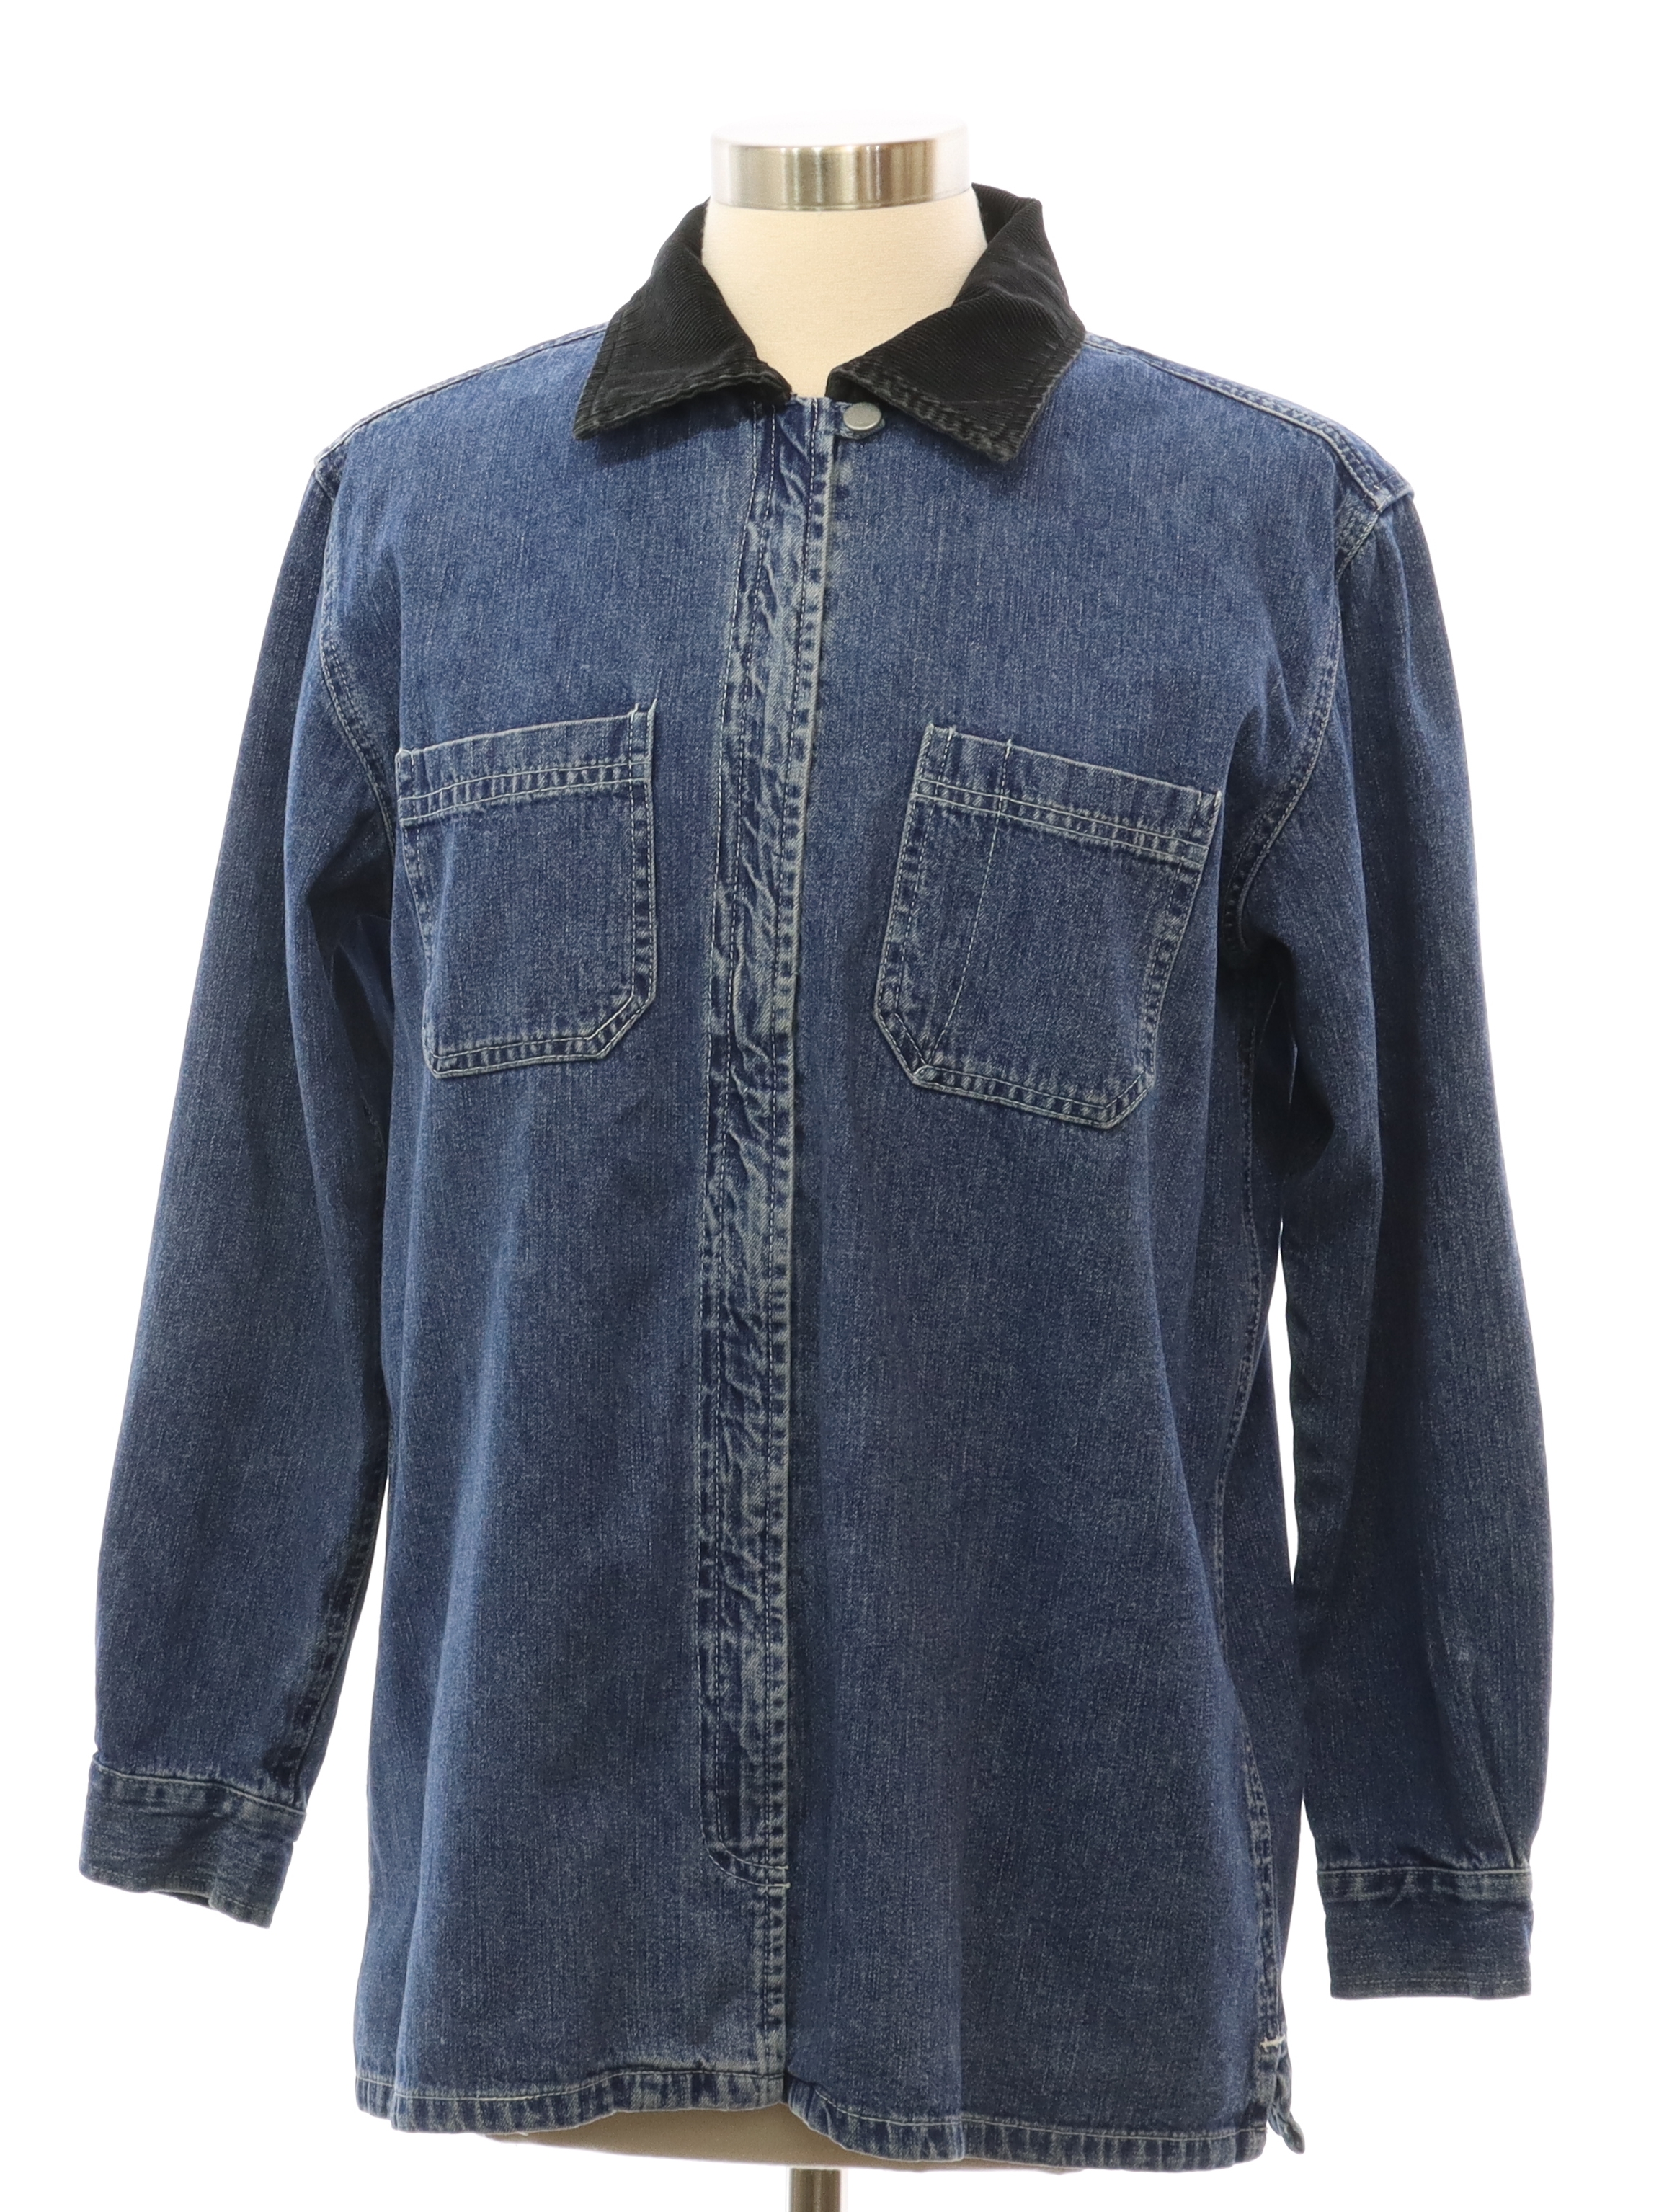 Retro 1990's Shirt (NY Jeans) : Late 90s or Early y2k 2000s -NY Jeans-  Womens hazy blue cotton button cuff longsleeve front zippered closure stone  washed denim shirt. A contrasting black corduroy